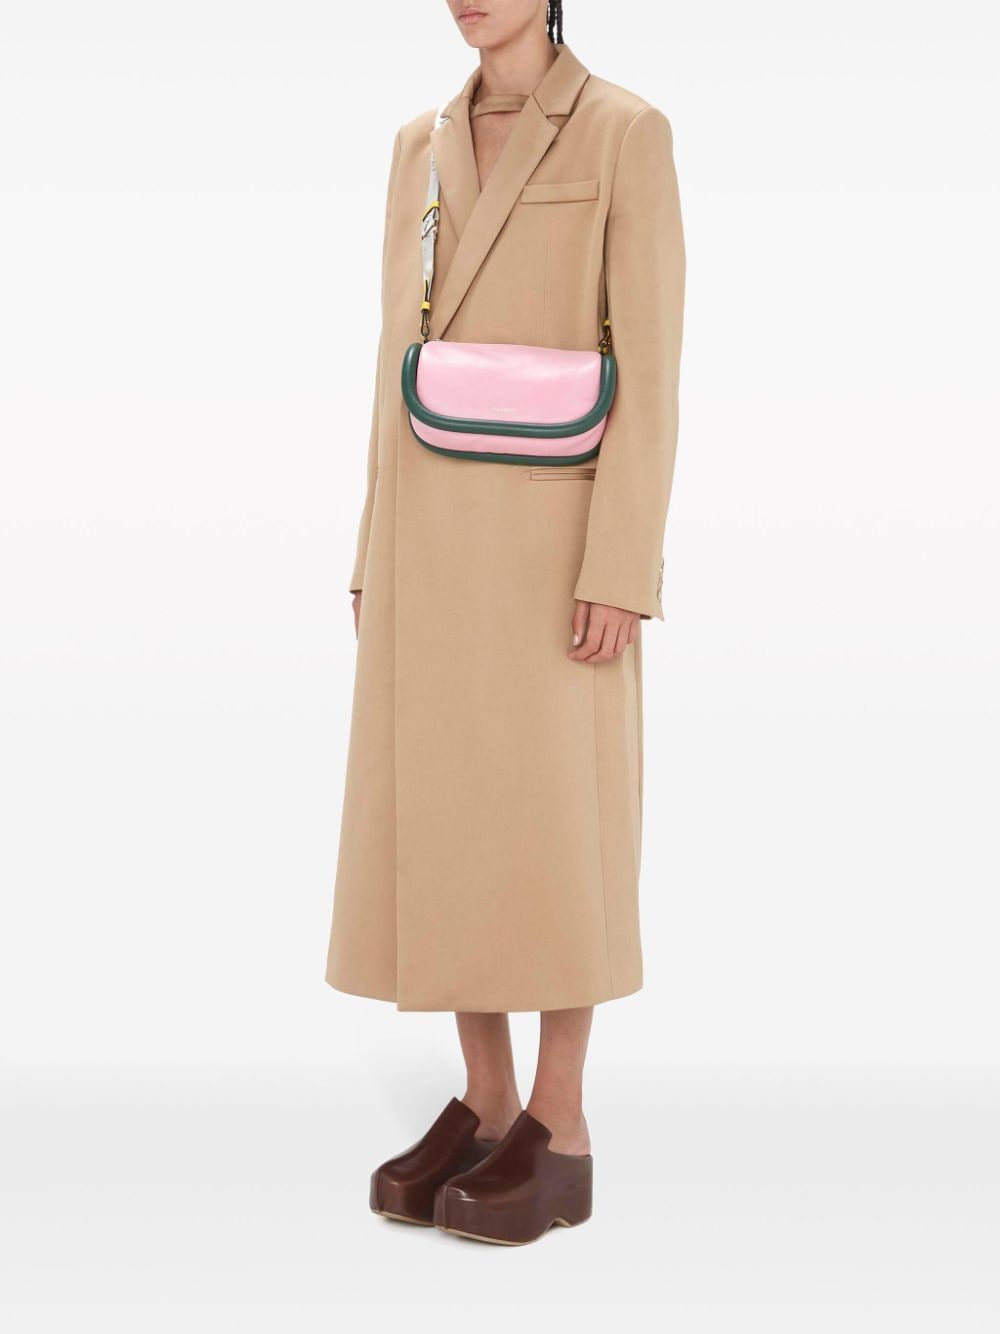 Shop Jw Anderson Bumper 15 Leather Crossbody Bag In Pink